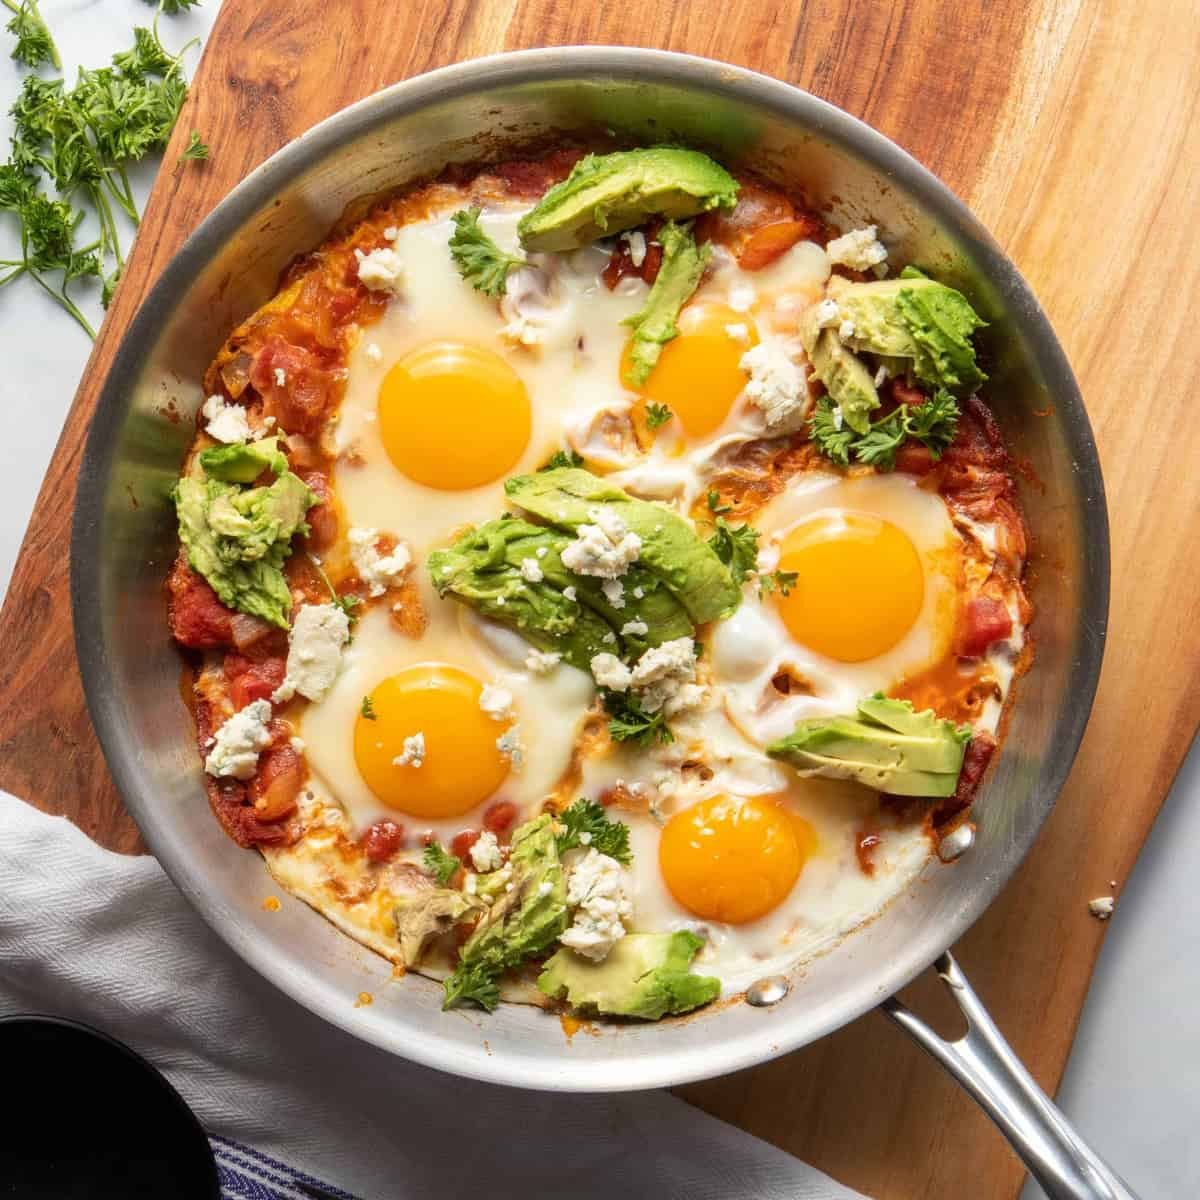 Delicious, Moroccan shakshuka with perfect runny yolk, garnished with parsley, avocado, and cheese